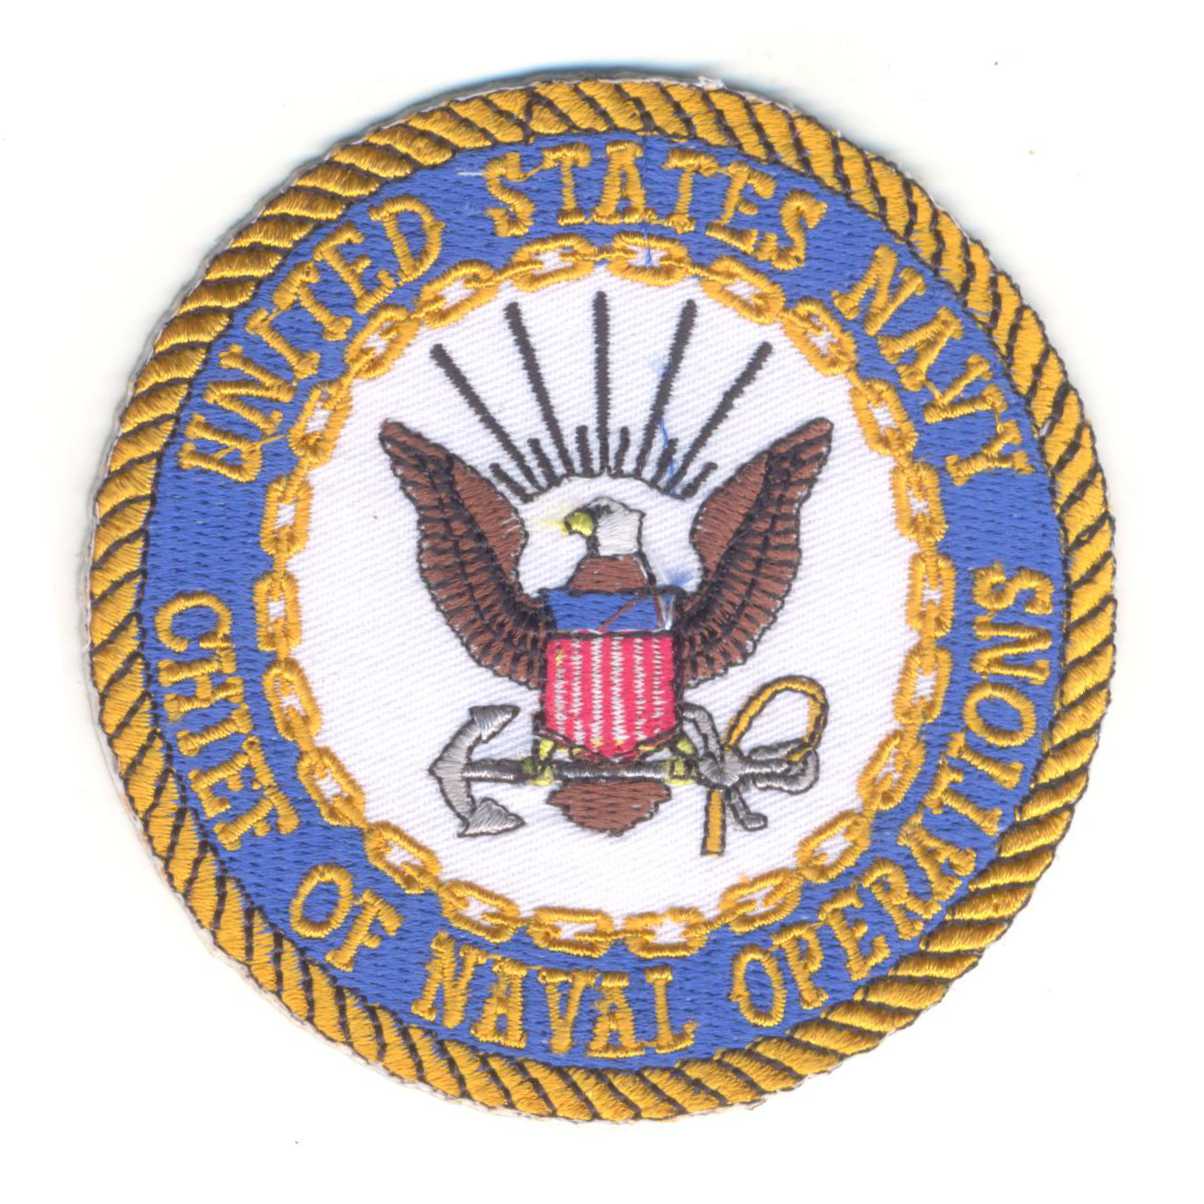  United States Navy Patch